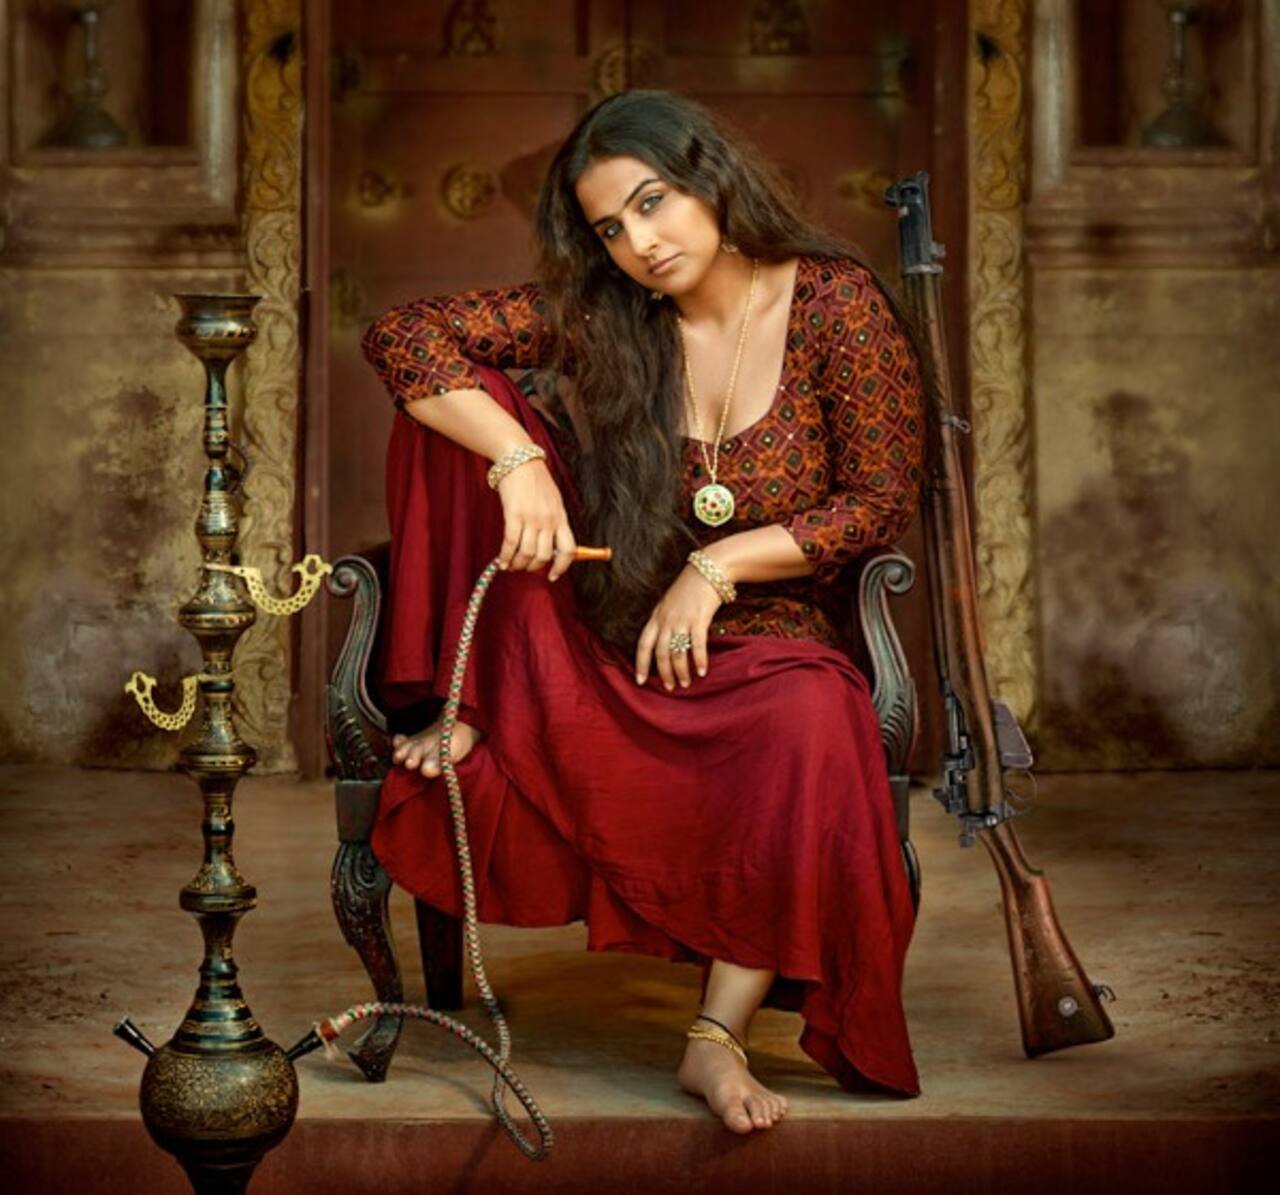 Vidya Balan is dying to show Begum Jaan's trailer to her family, but she will NOT - here's why